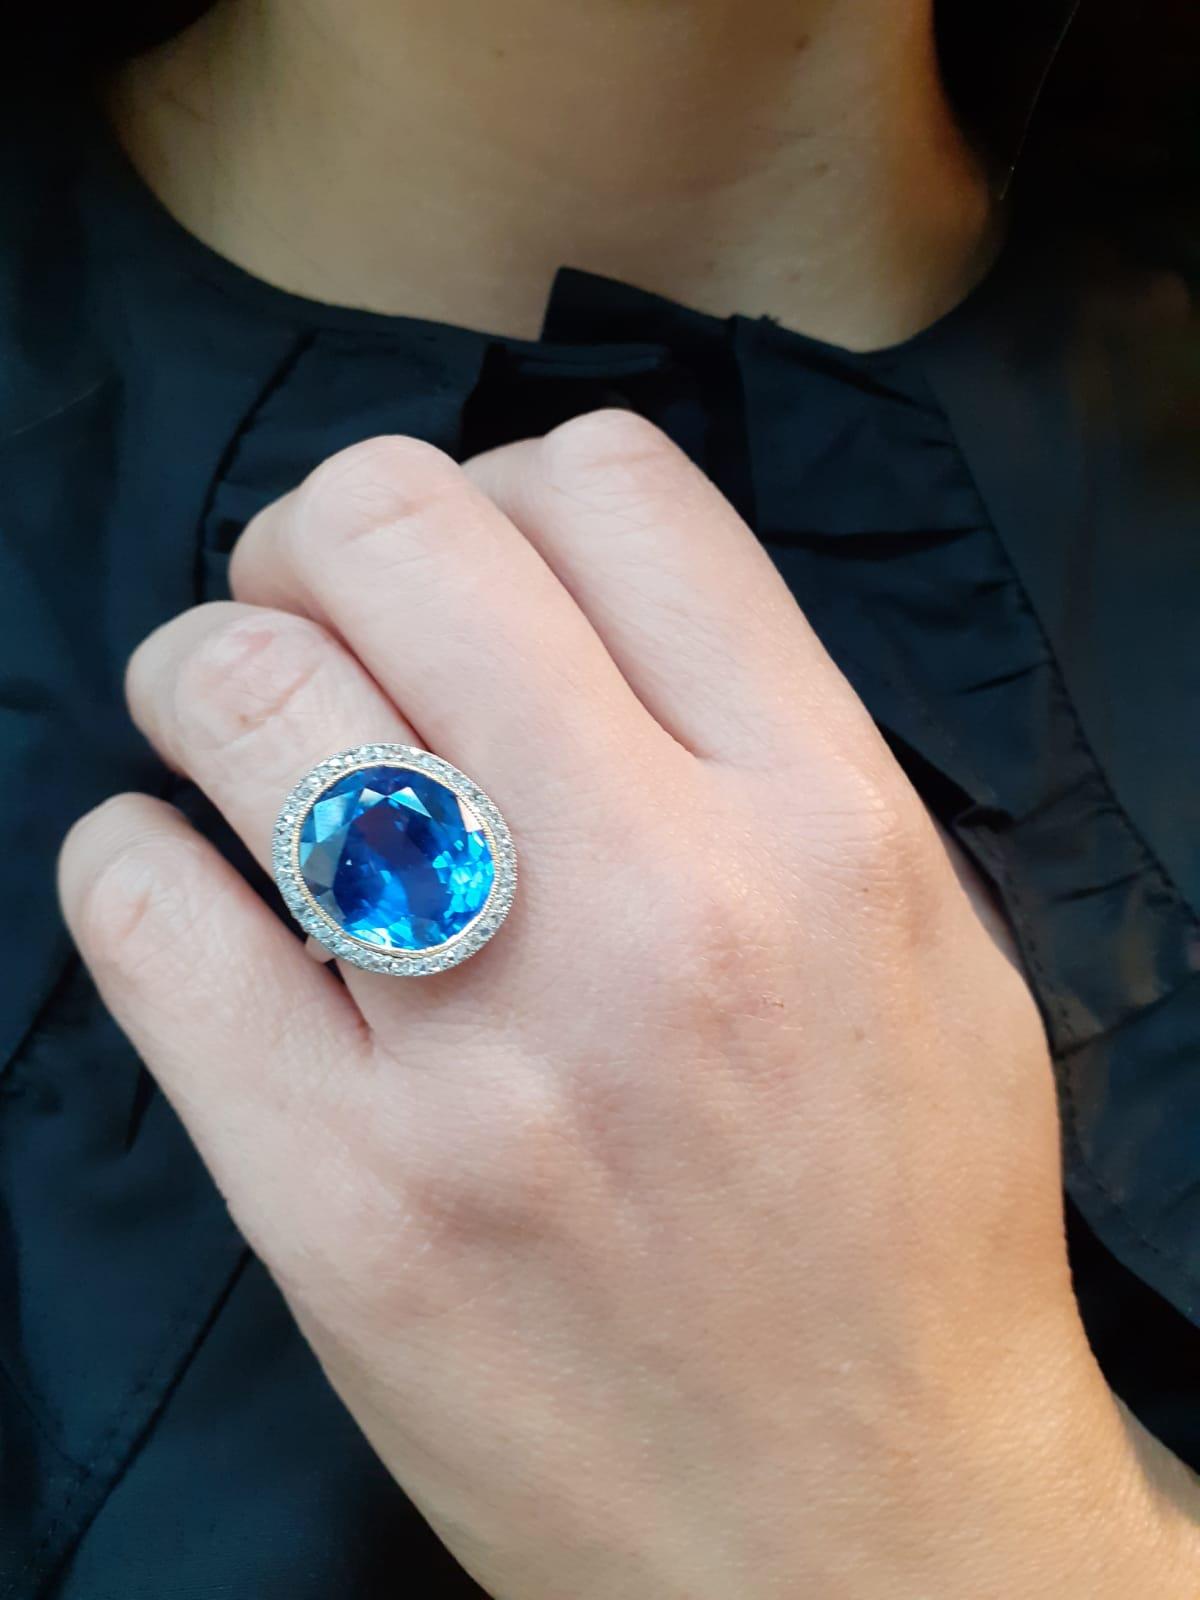 A natural untreated 14.50 carat sapphire diamond ring set in platinum.

This truly stunning ring is set to its centre with an exceptional oval cut sapphire of approximately 14.5 carats, which is securely set into a handmade, intricately designed